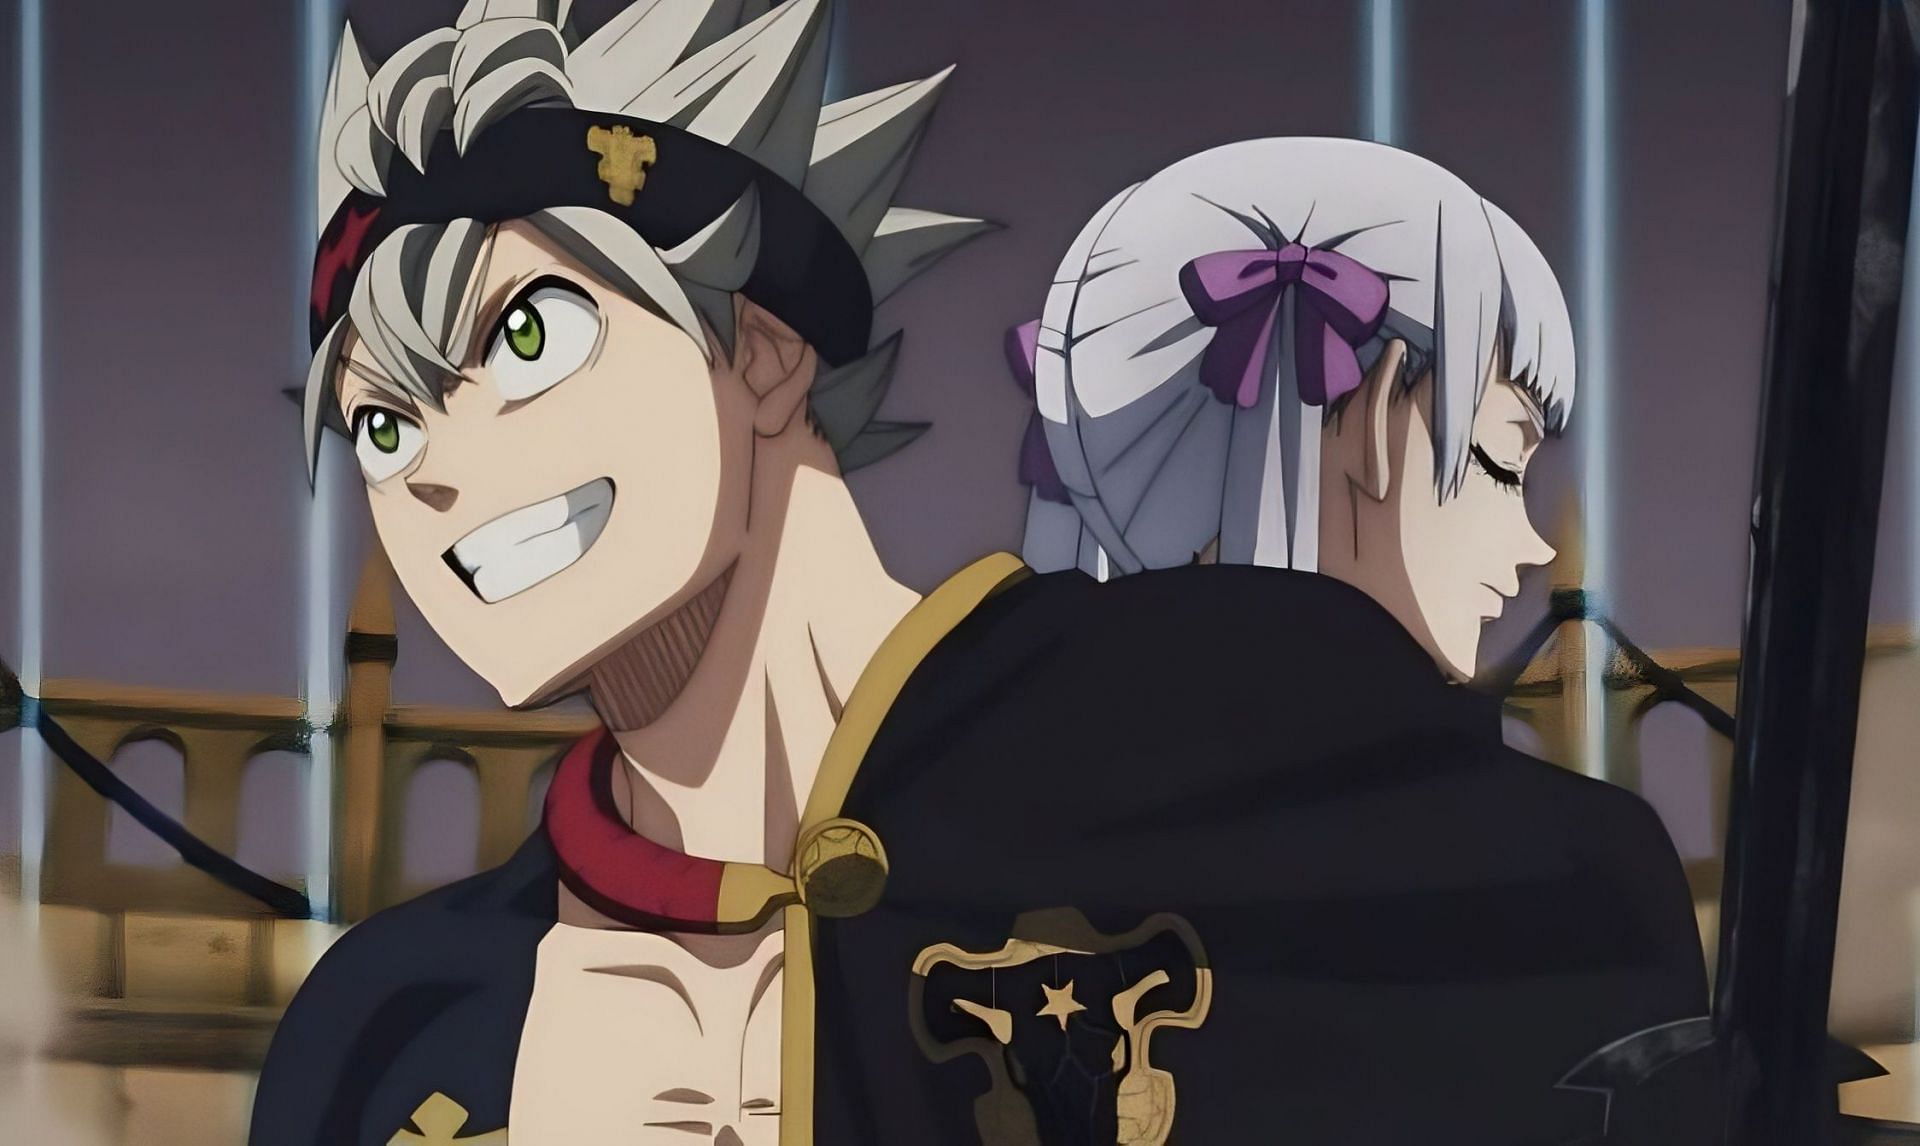 Black Clover movie confirmed to show Asta and Noelle team-up (Image via Studio Pierrot)